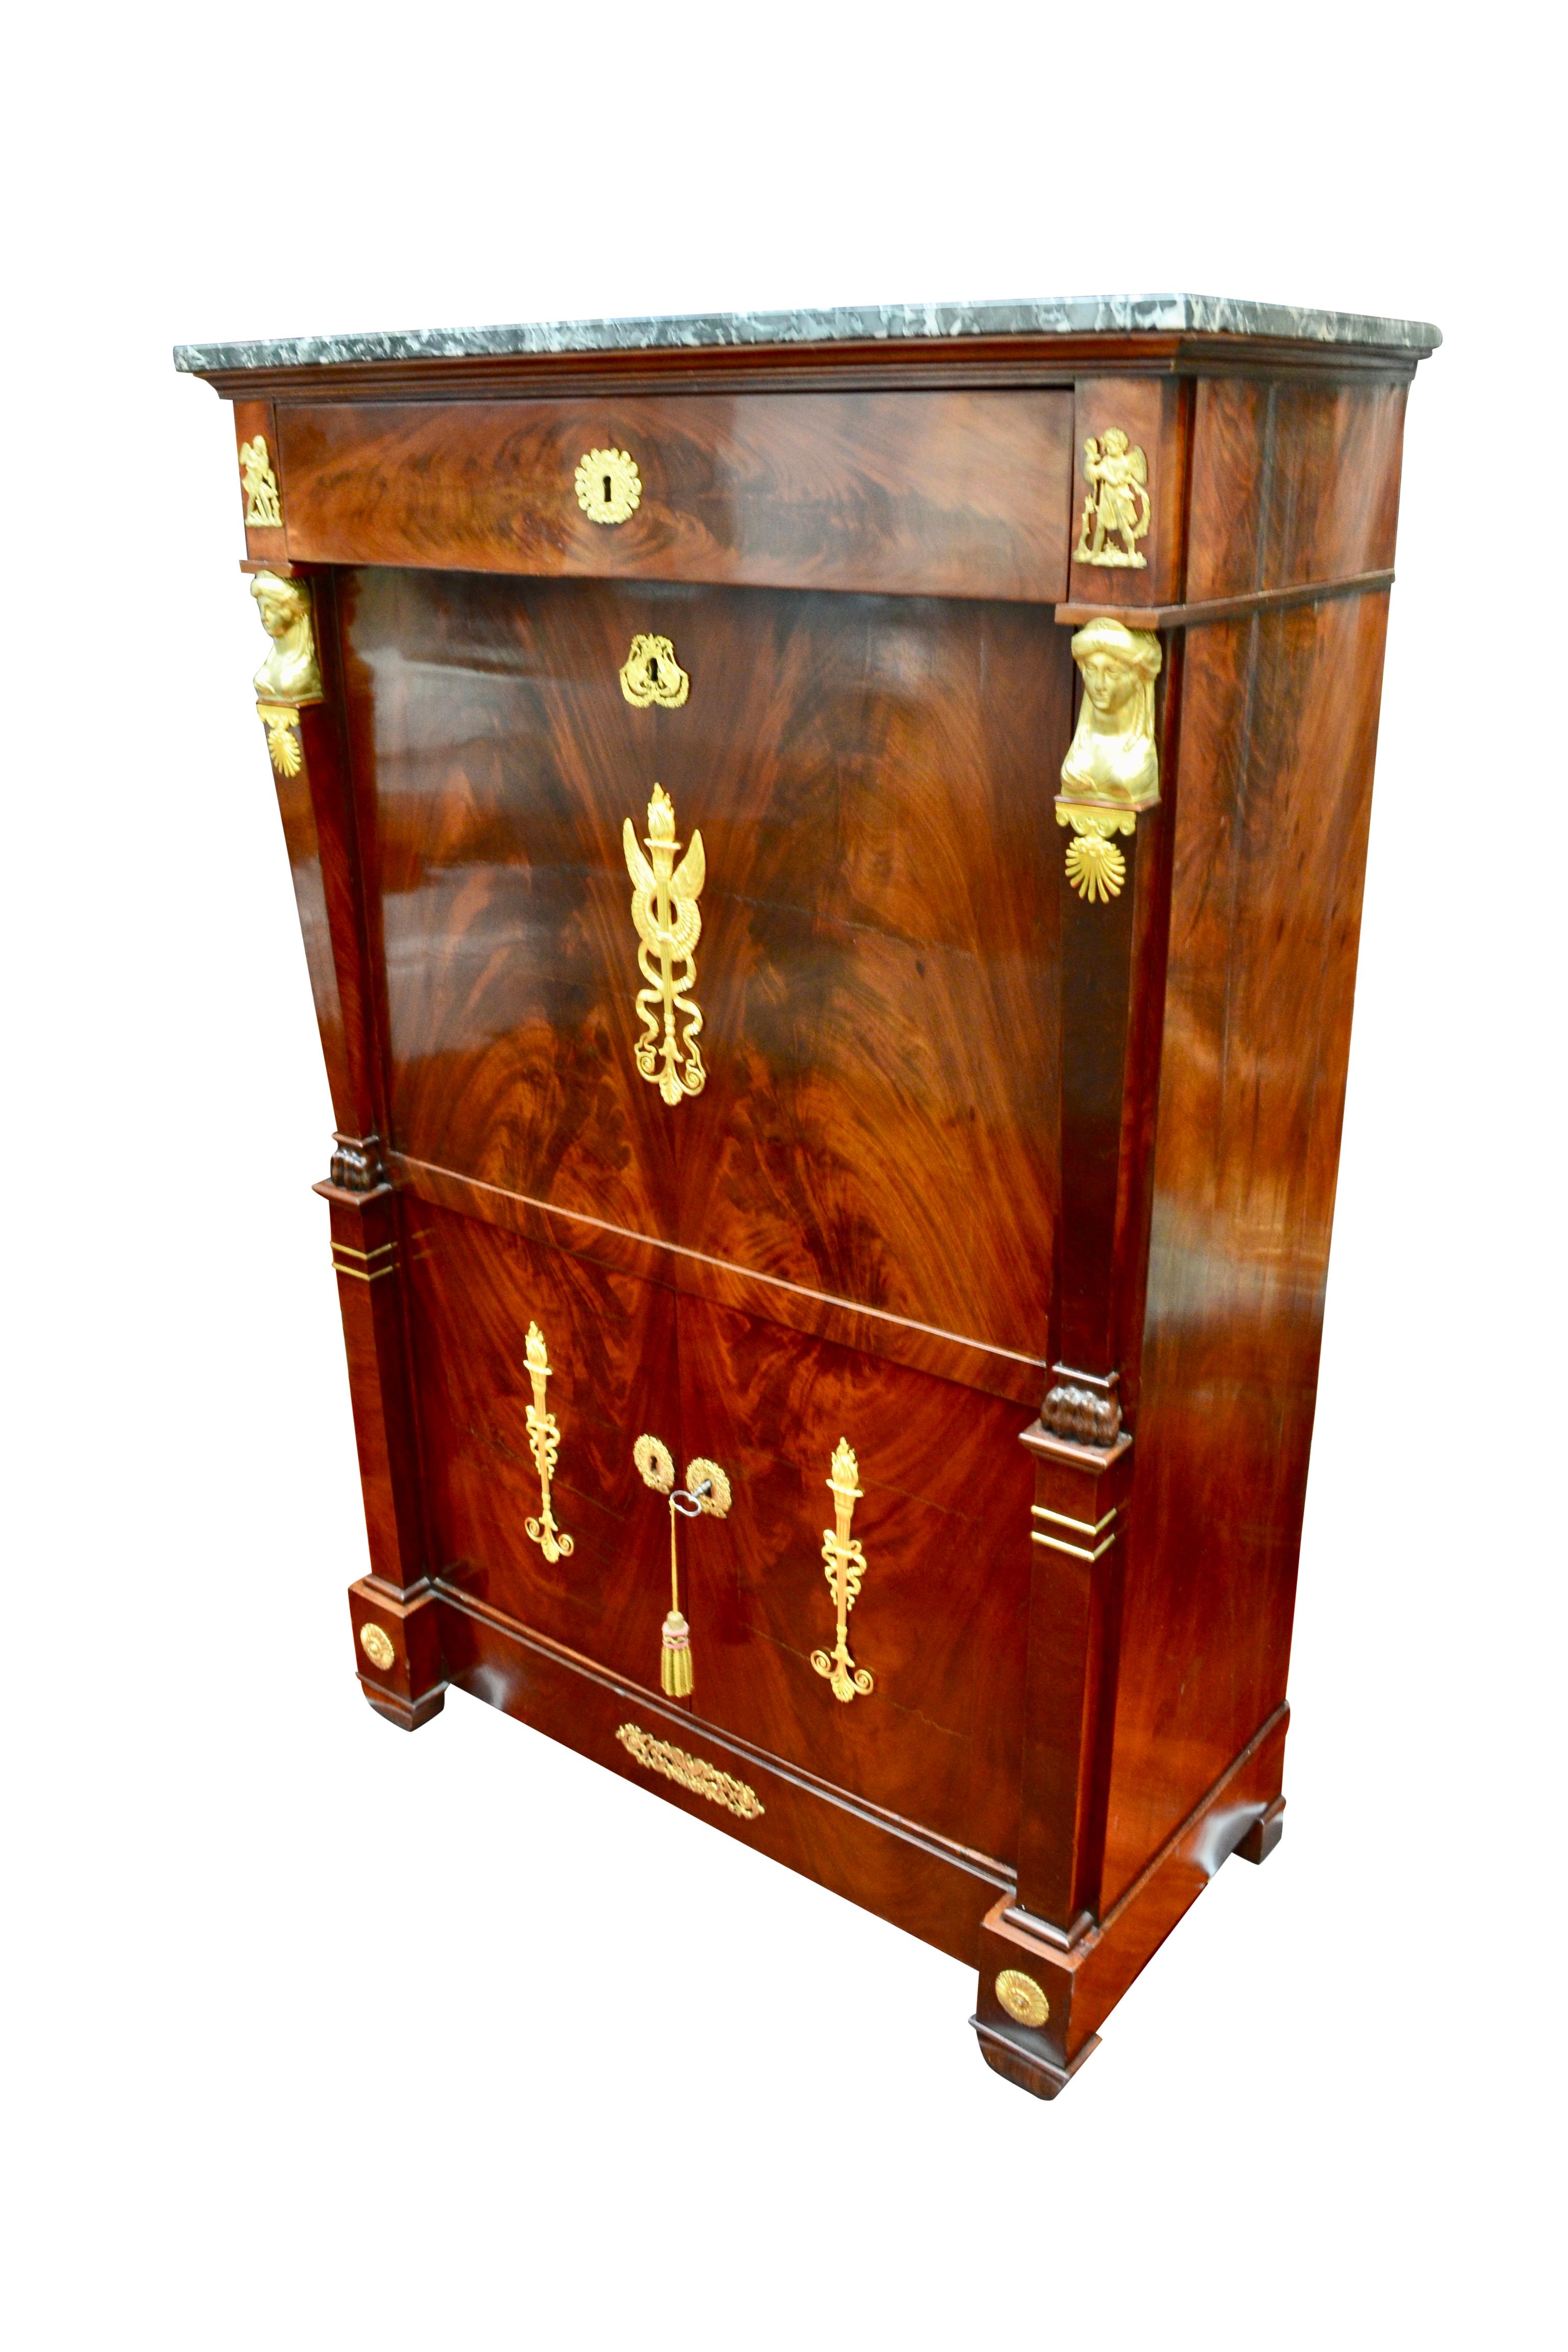 A period French Empire fall front desk referred to as an Abattant. The case is constructed in a rich dark mahogany. There is a single drawer below the mottled grey marble top, below that is the fall front door which is flanked by columns surmounted